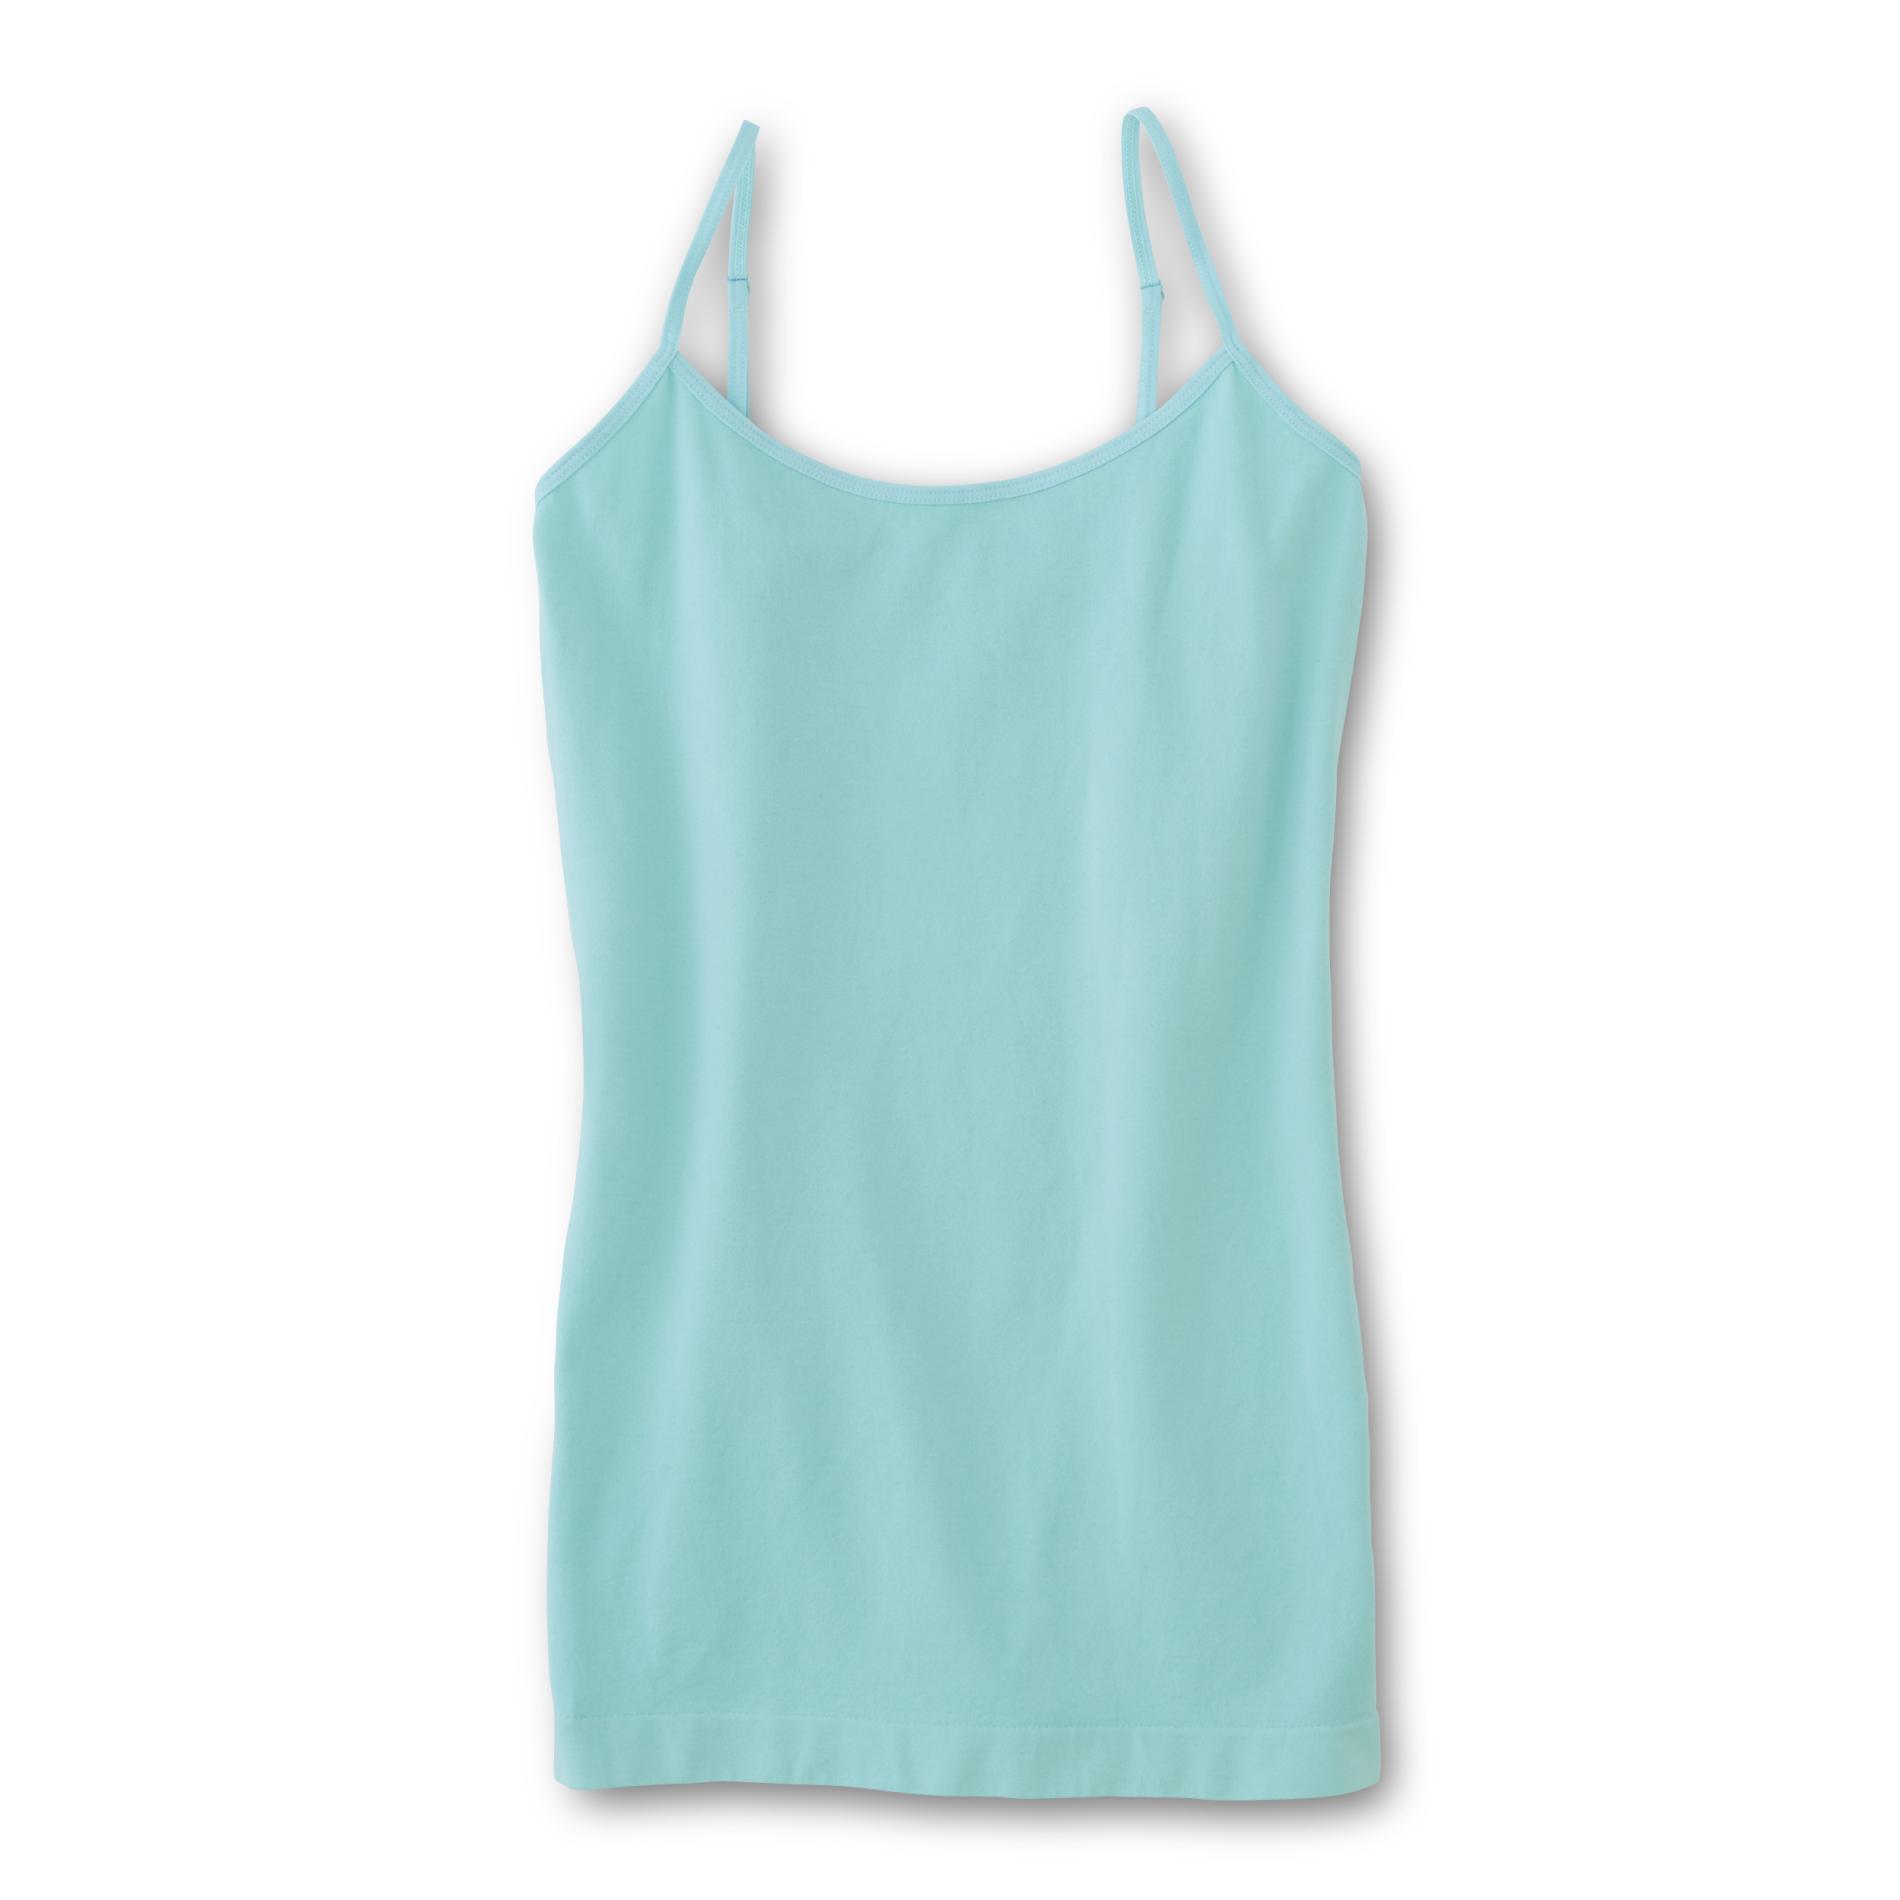 Jaclyn Smith Women's Seamless Camisole